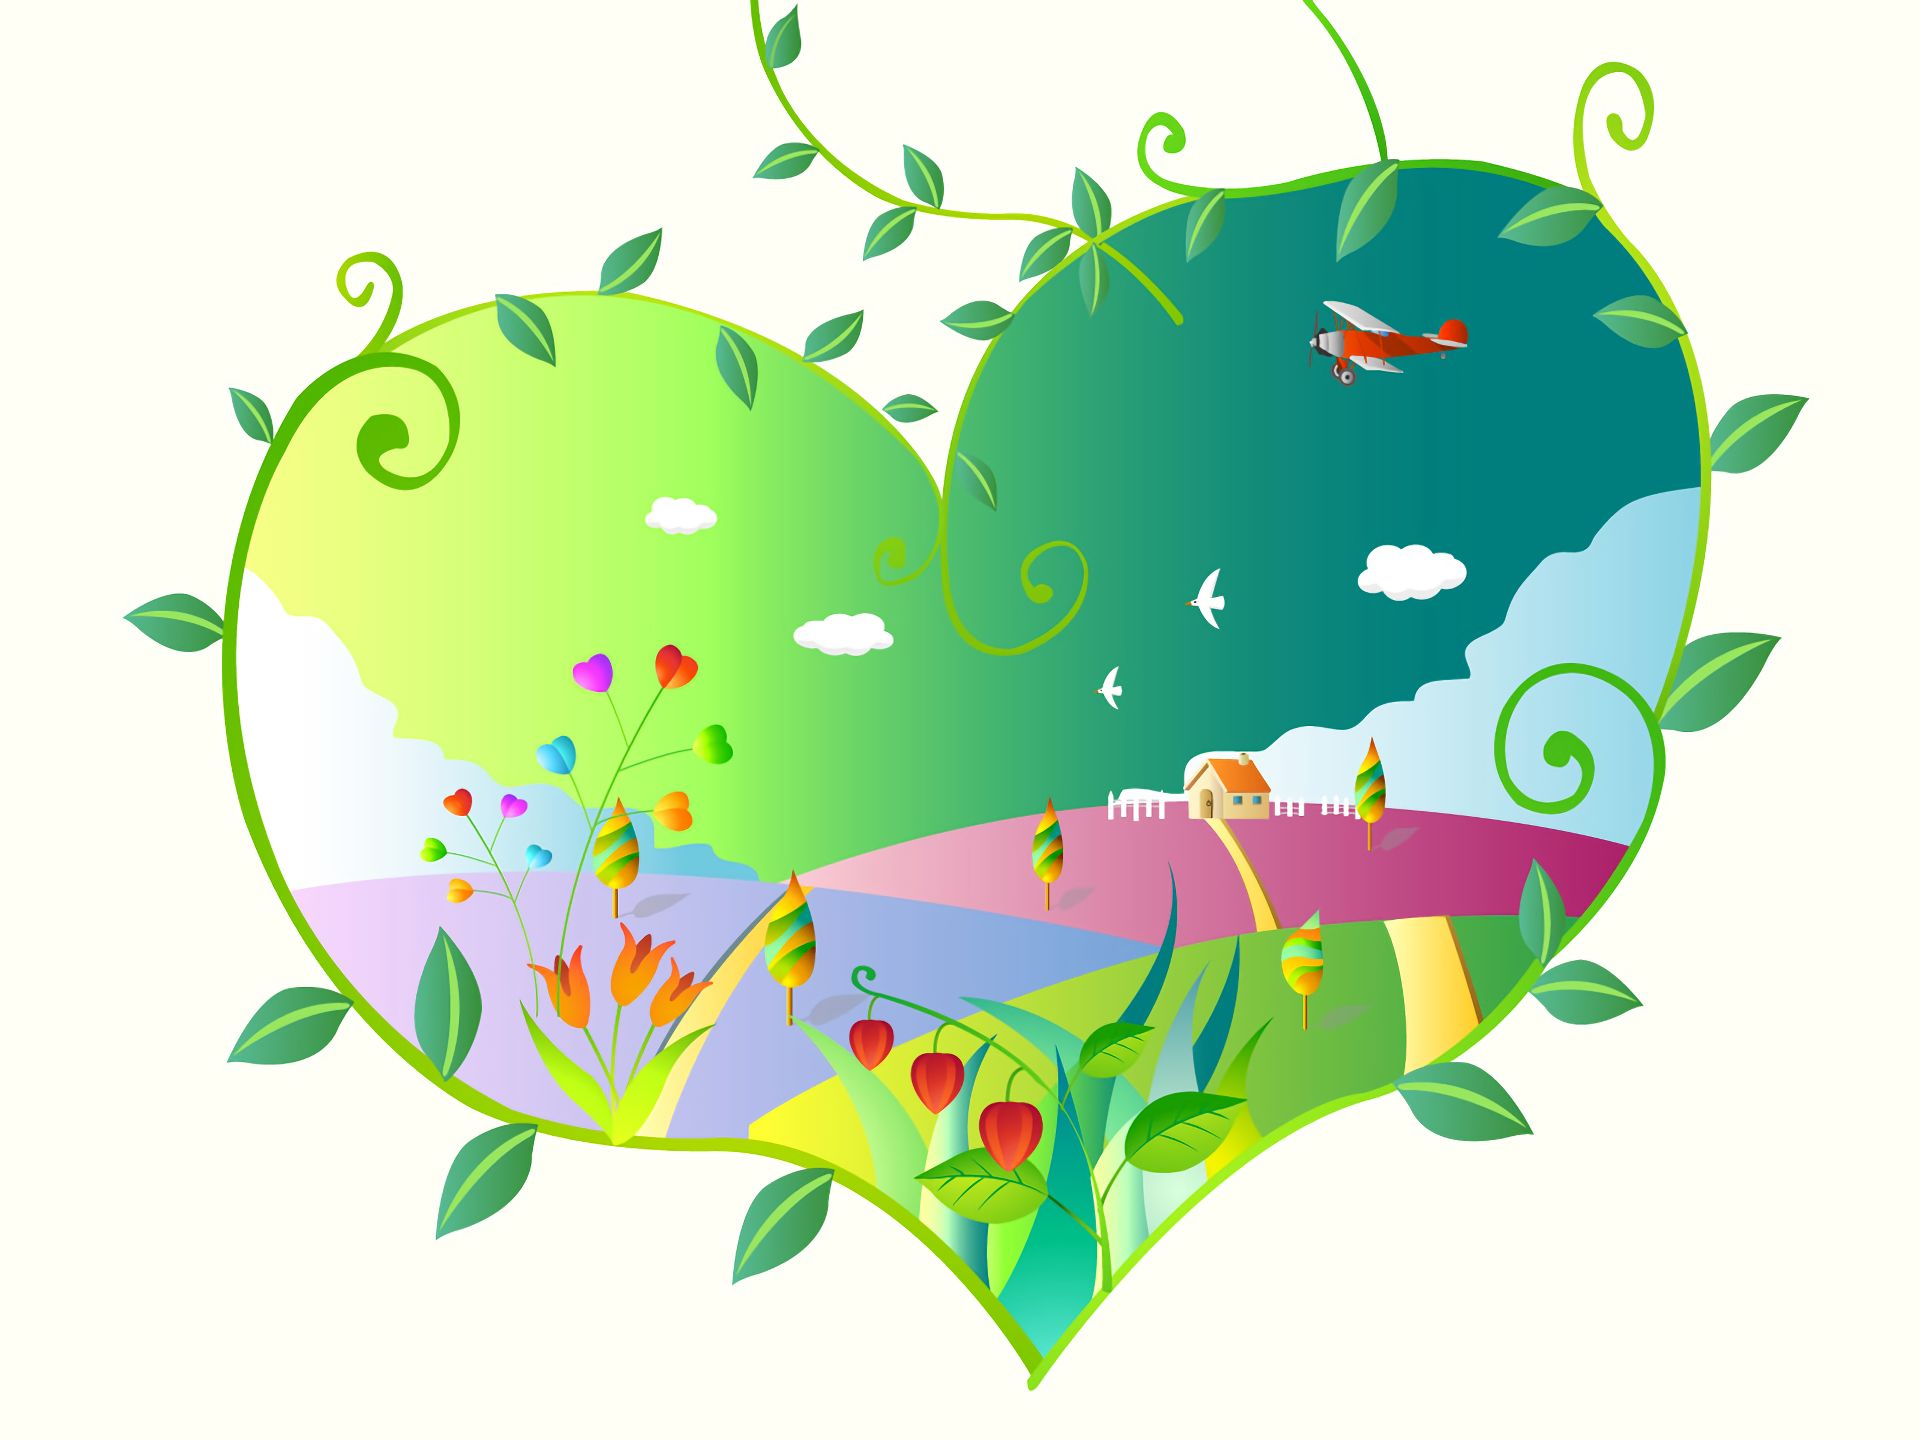 artistic, heart, earth day, earth, planet